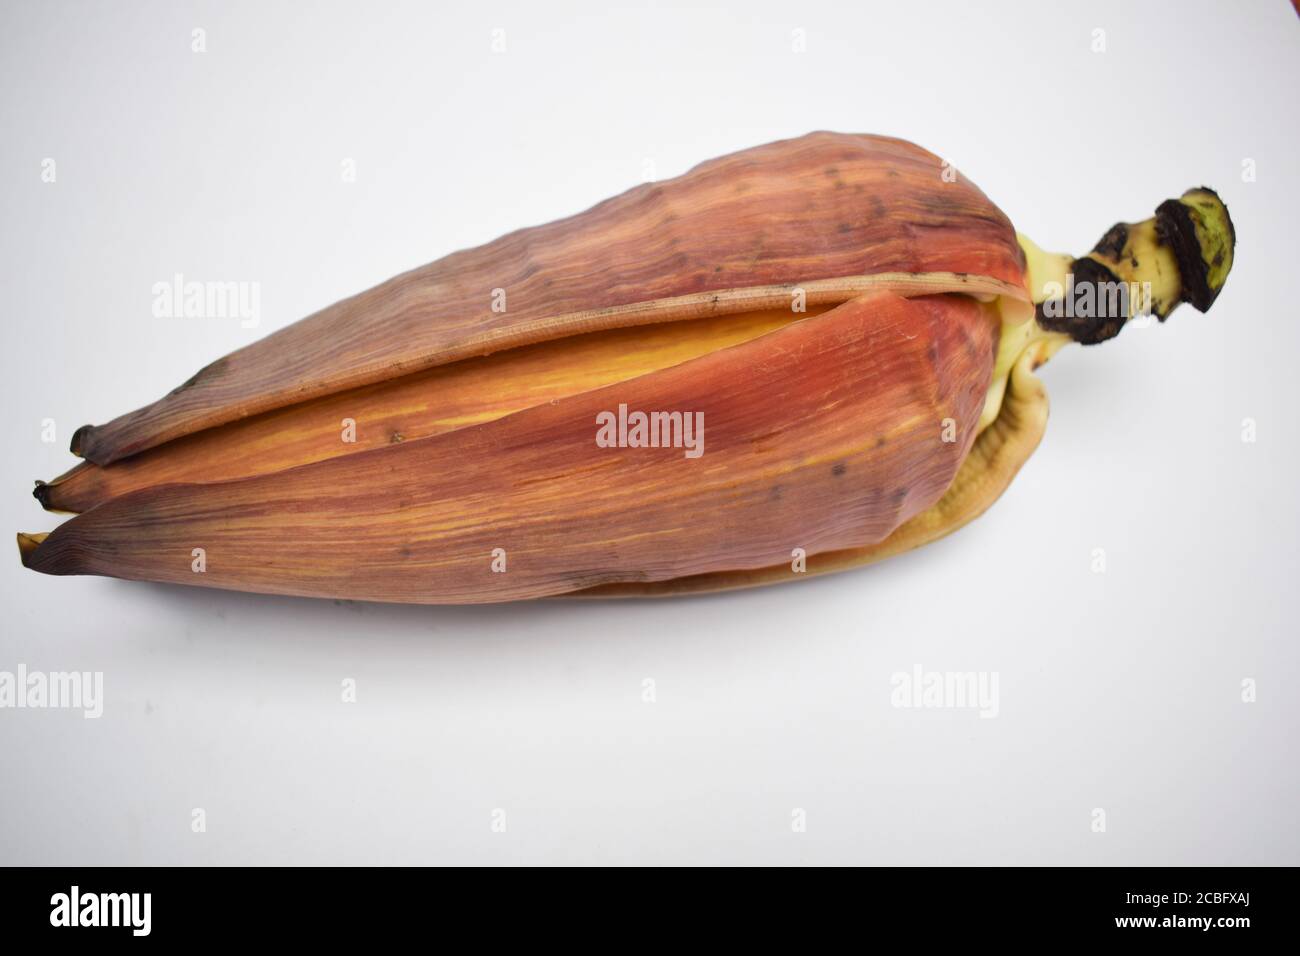 Single Banana flower isolated on white background from Asia Stock Photo